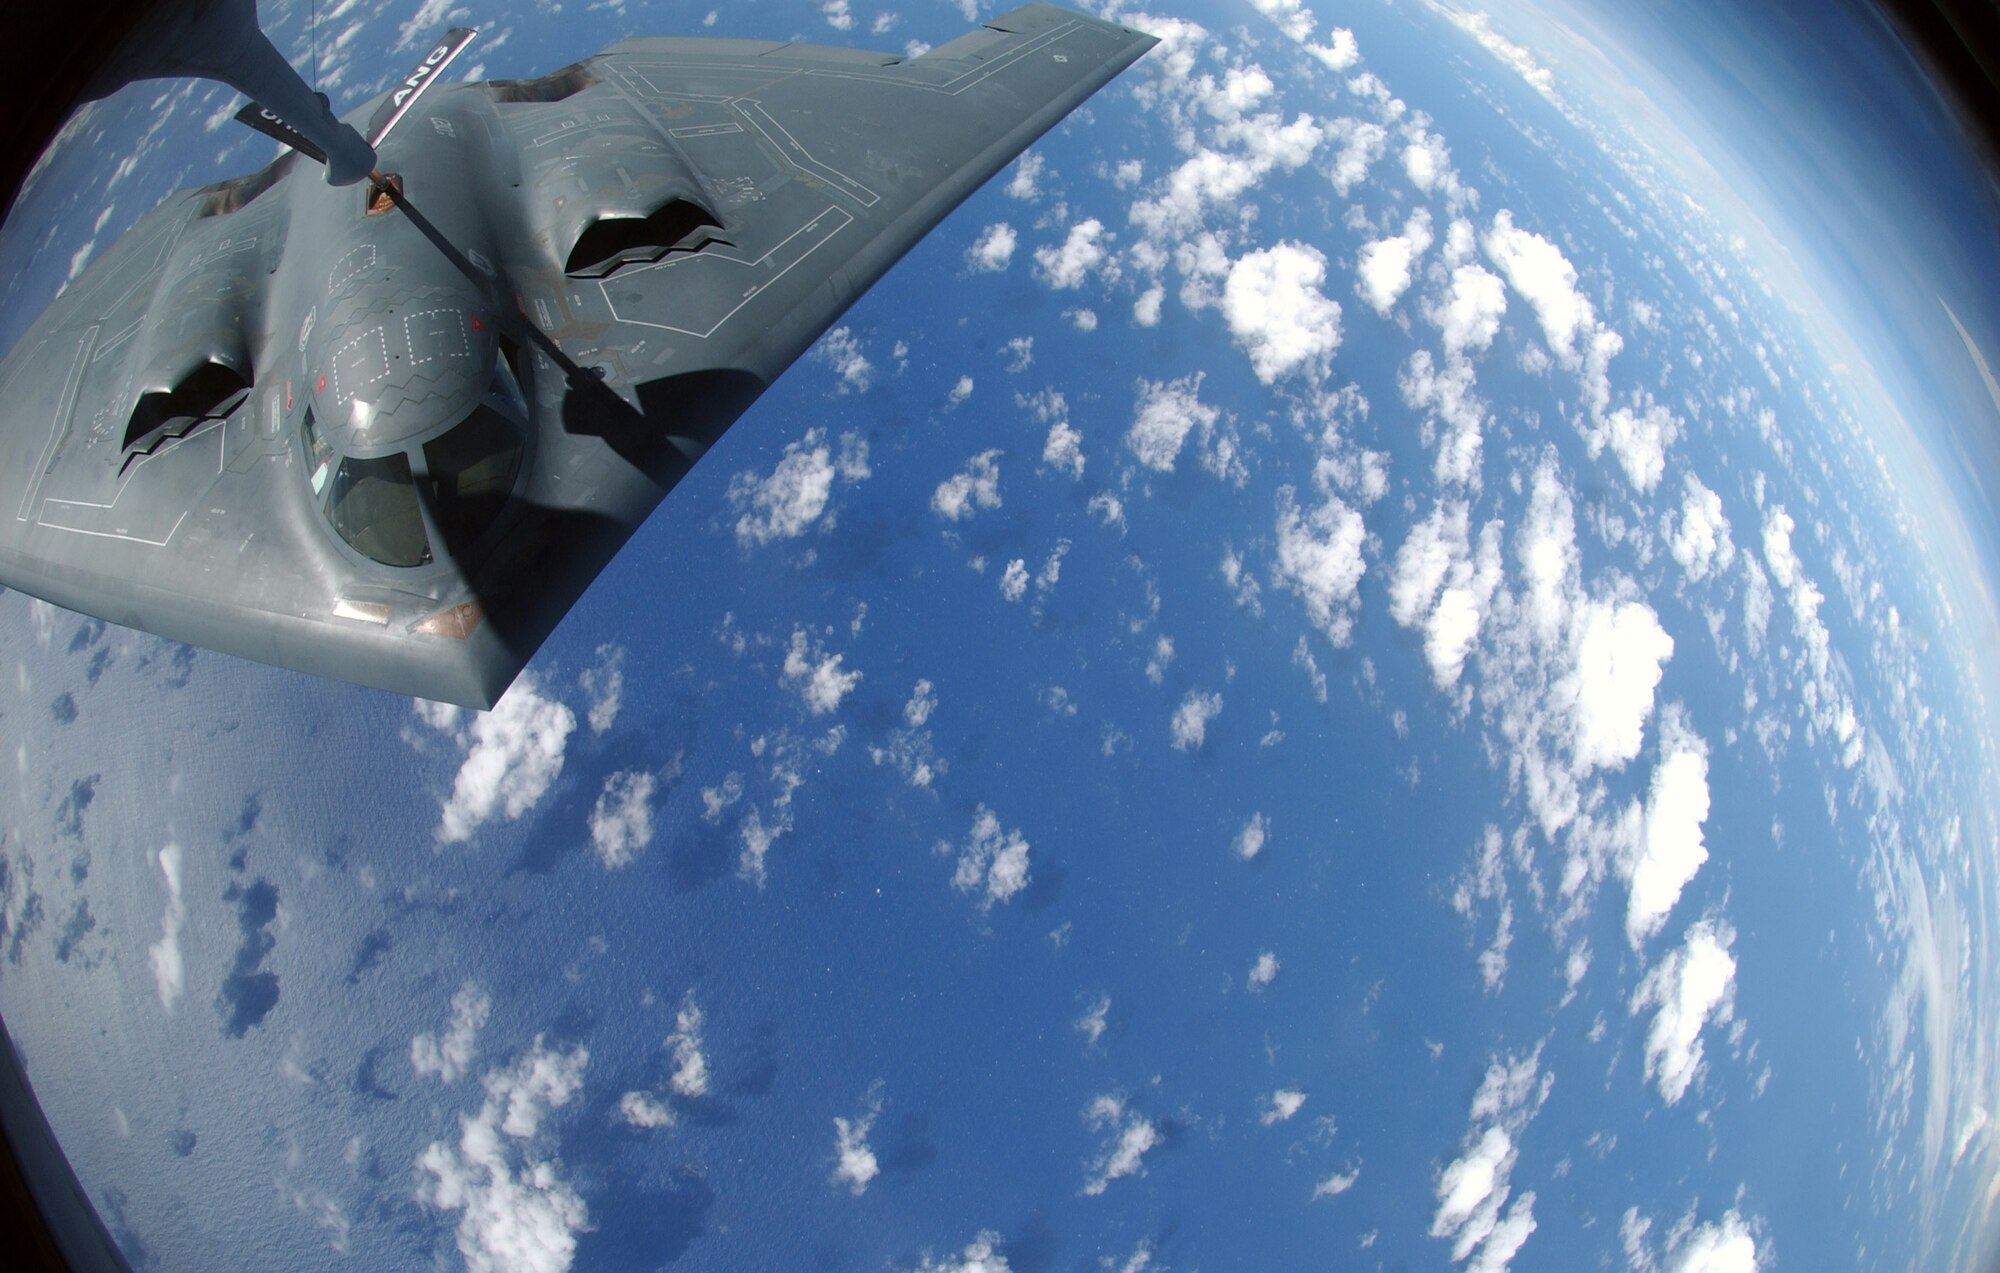 A KC-135 Stratotanker refuels a B-2 Spirit Nov. 20 over the Pacific Ocean. The B-2 and KC-135 are deployed to Andersen Air Force Base, Guam, to support U.S. Pacific Command's continuous bomber presence and theater security package operations. The KC-135 is assigned to the from the 121st Refueling Squadron from Rickenbacker International Airport at Columbus, Ohio. The B-2 is assigned to the 509th Bomb Wing from Whiteman AFB, Mo. (U.S. Air Force photo/Senior Airman Brian Kimball) 
 